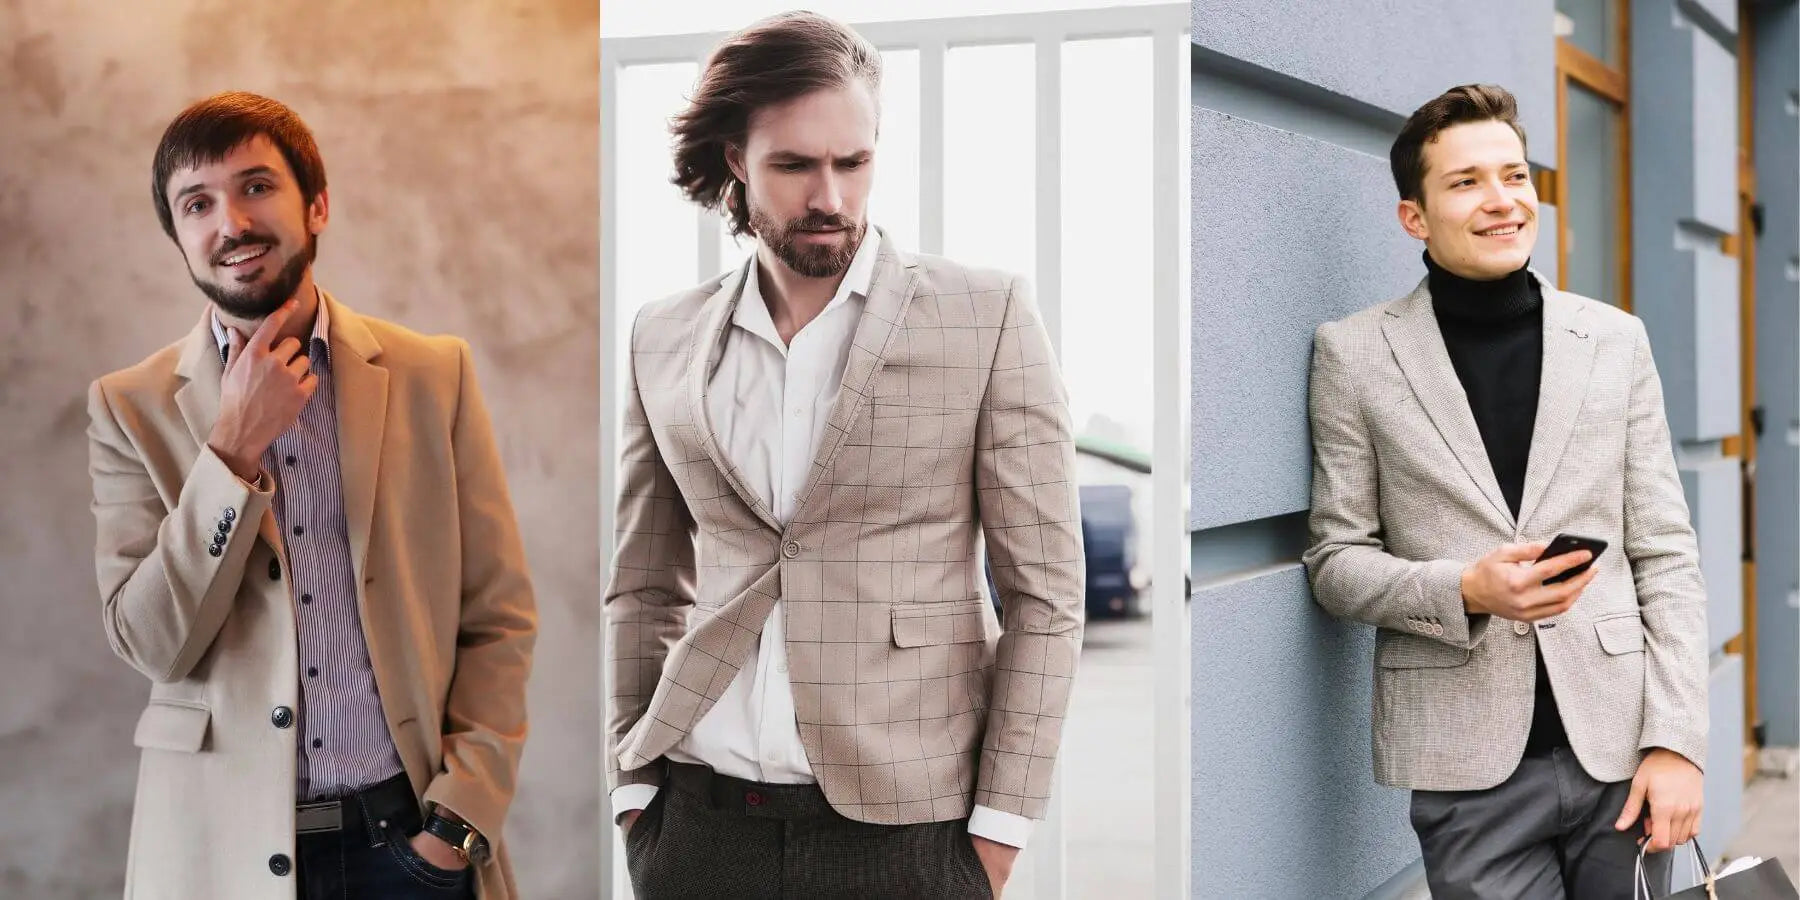 Cream Suit Combinations with a shirt and tie